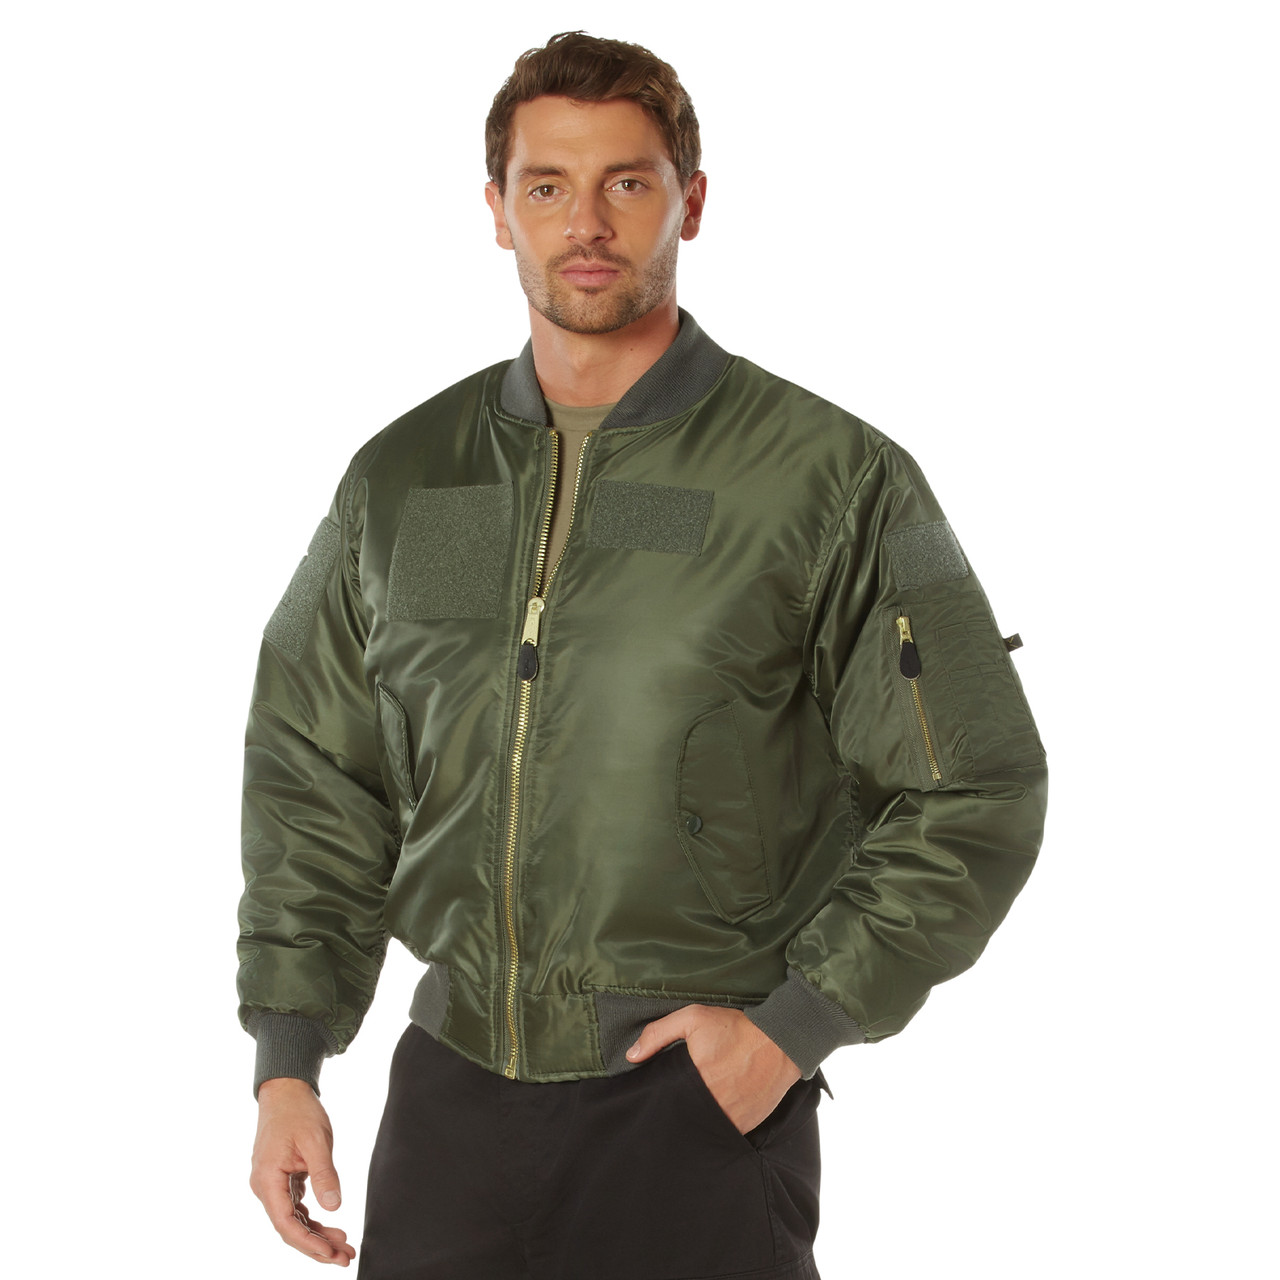 Rothco MA-1 Flight Jacket with Patches - Thunderhead Outfitters